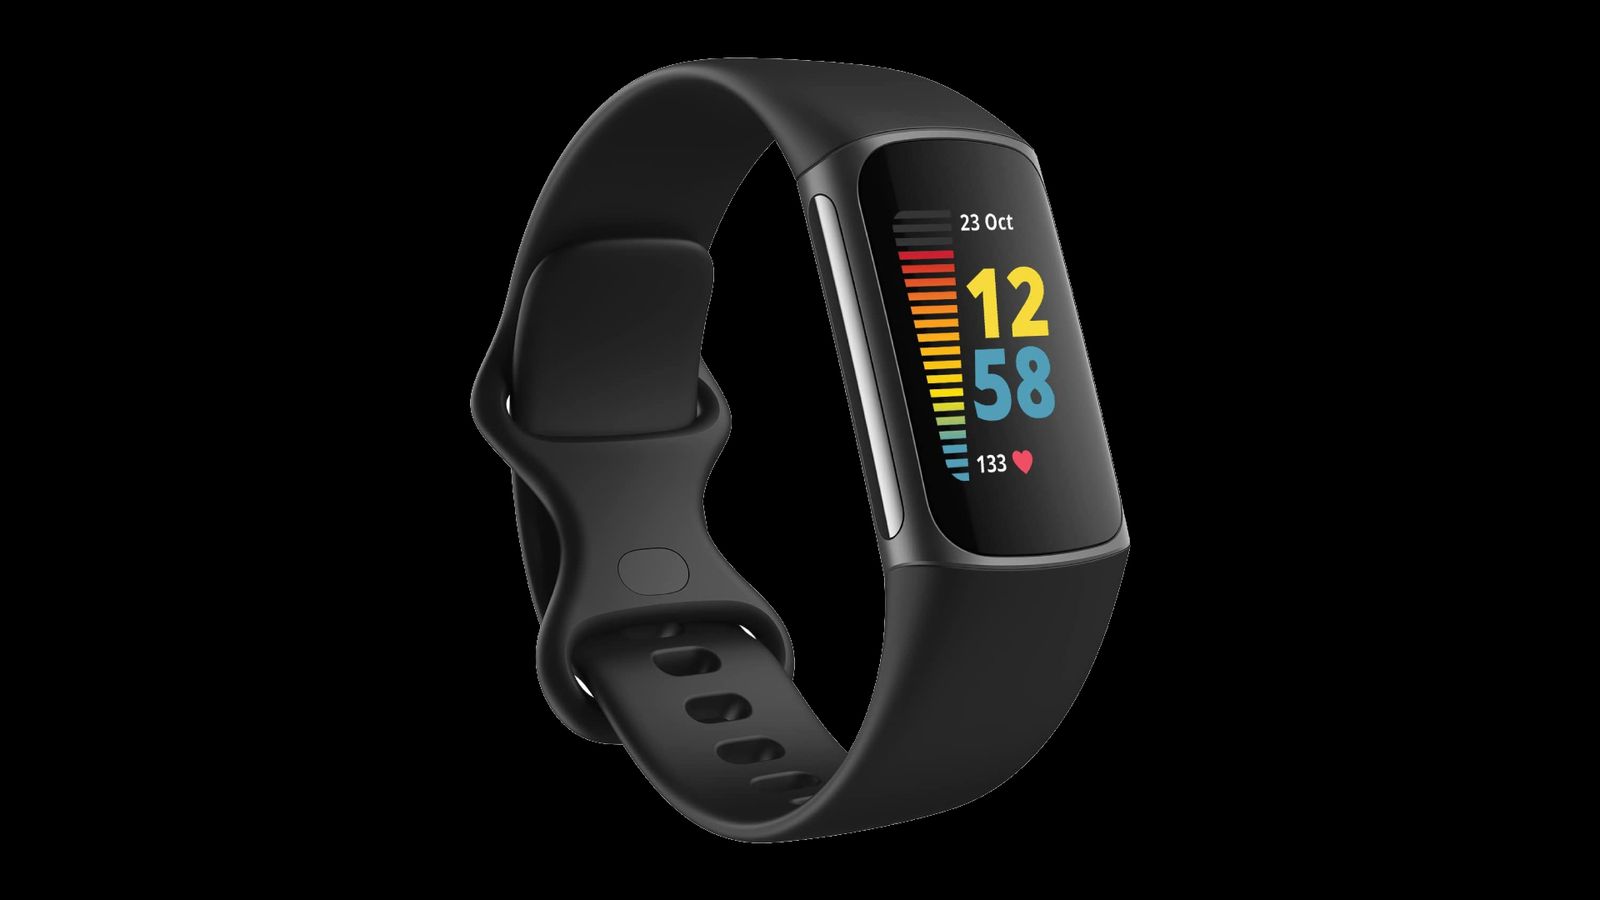 Best fitness trackers and watches - Fitbit Charge 5 product image of a black fitness band with the time and heart rate on display.